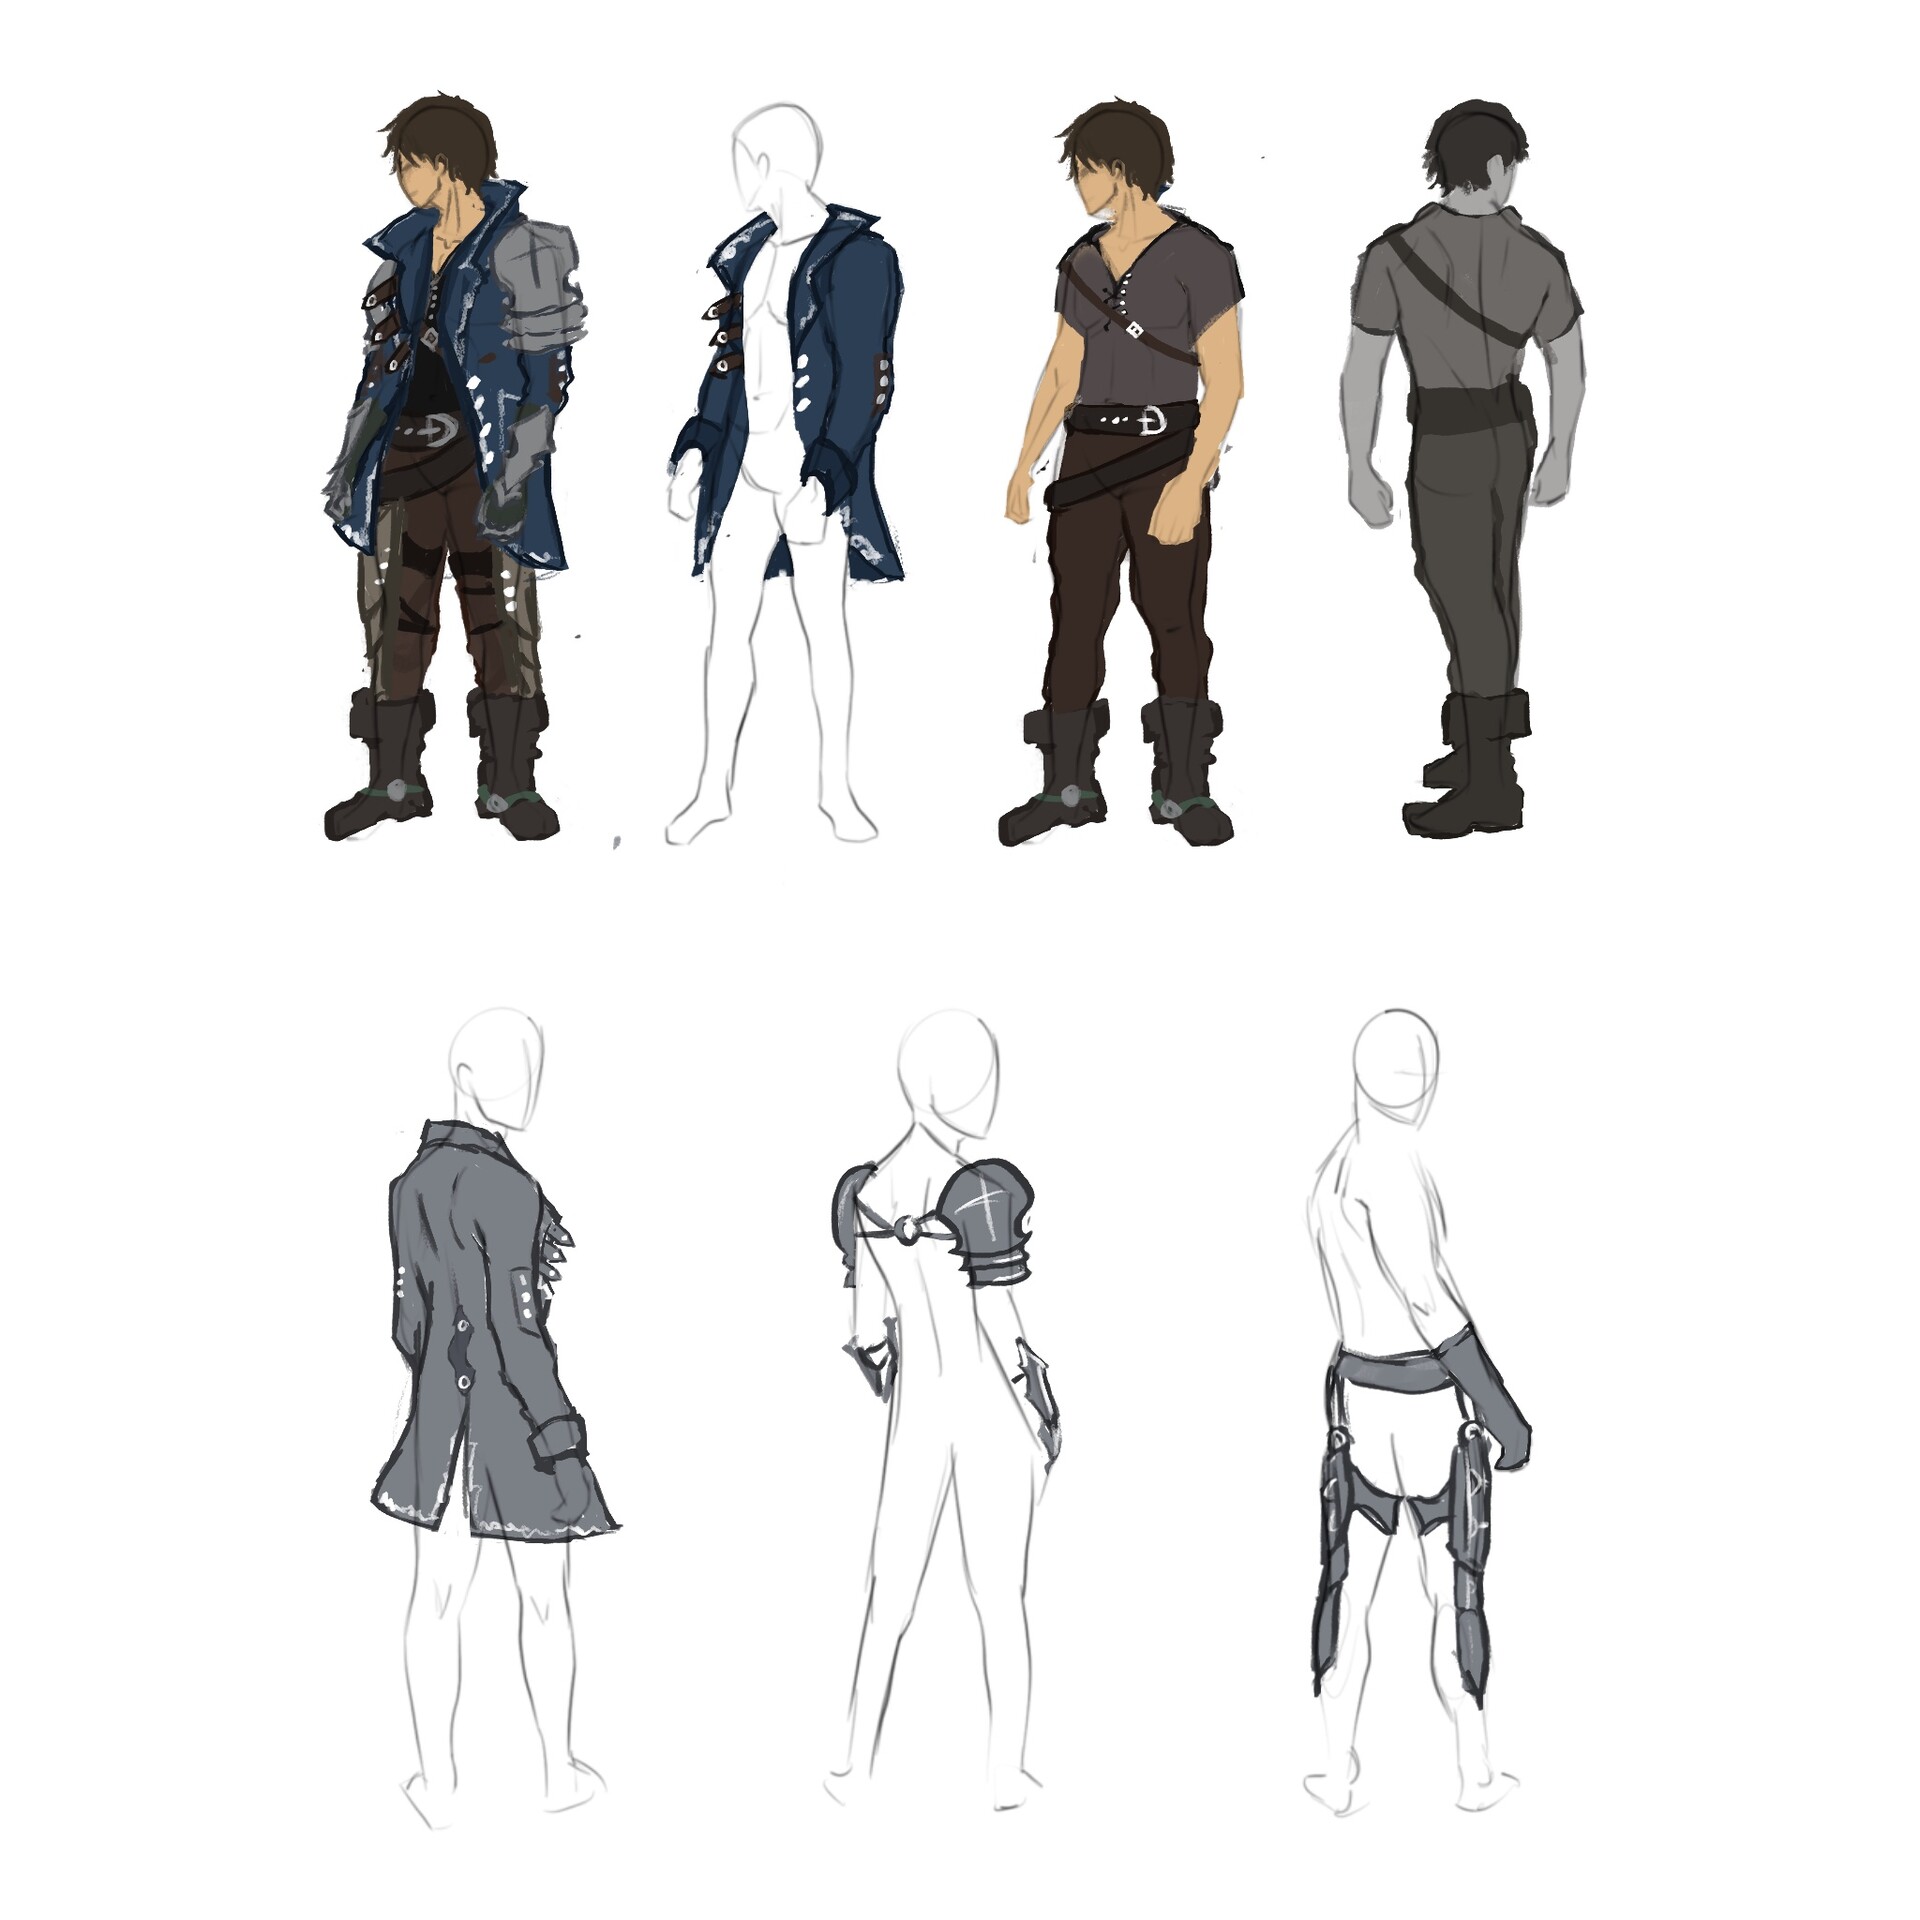 ArtStation - Character Outfit Design Sketches